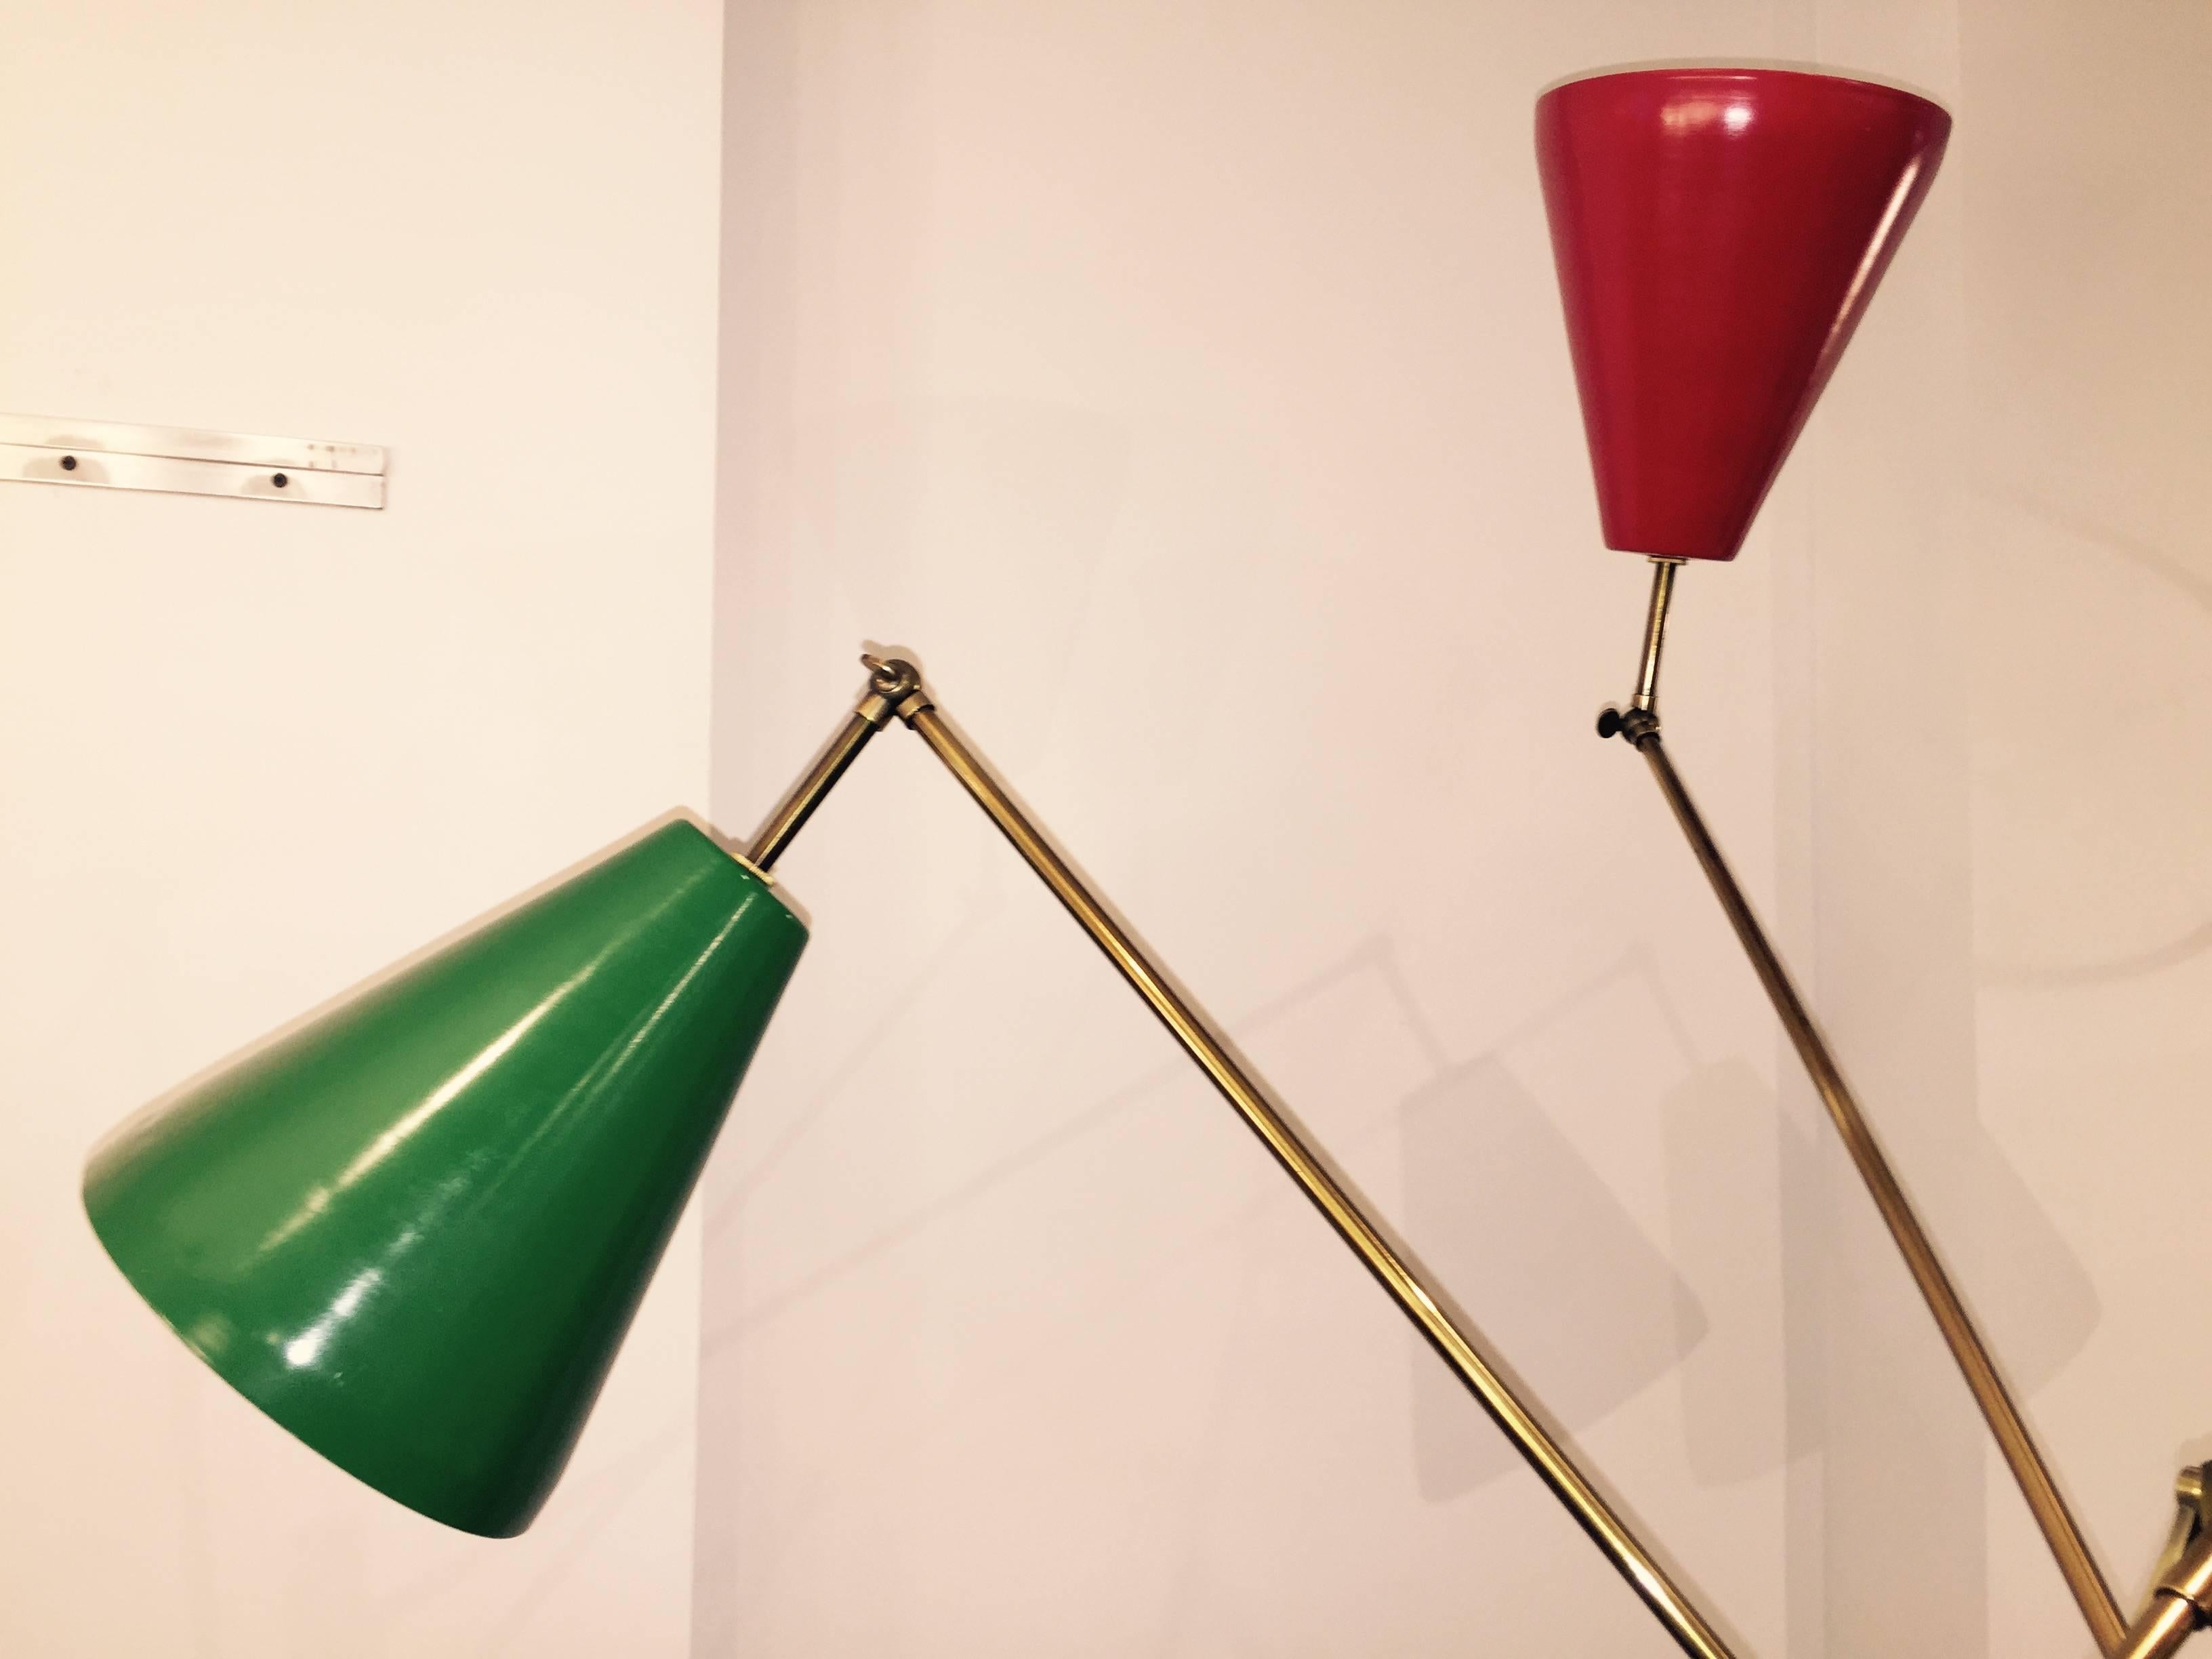 Triple shade Arredoluce style floor lamp. Adjustable brass arms with articulated shades.